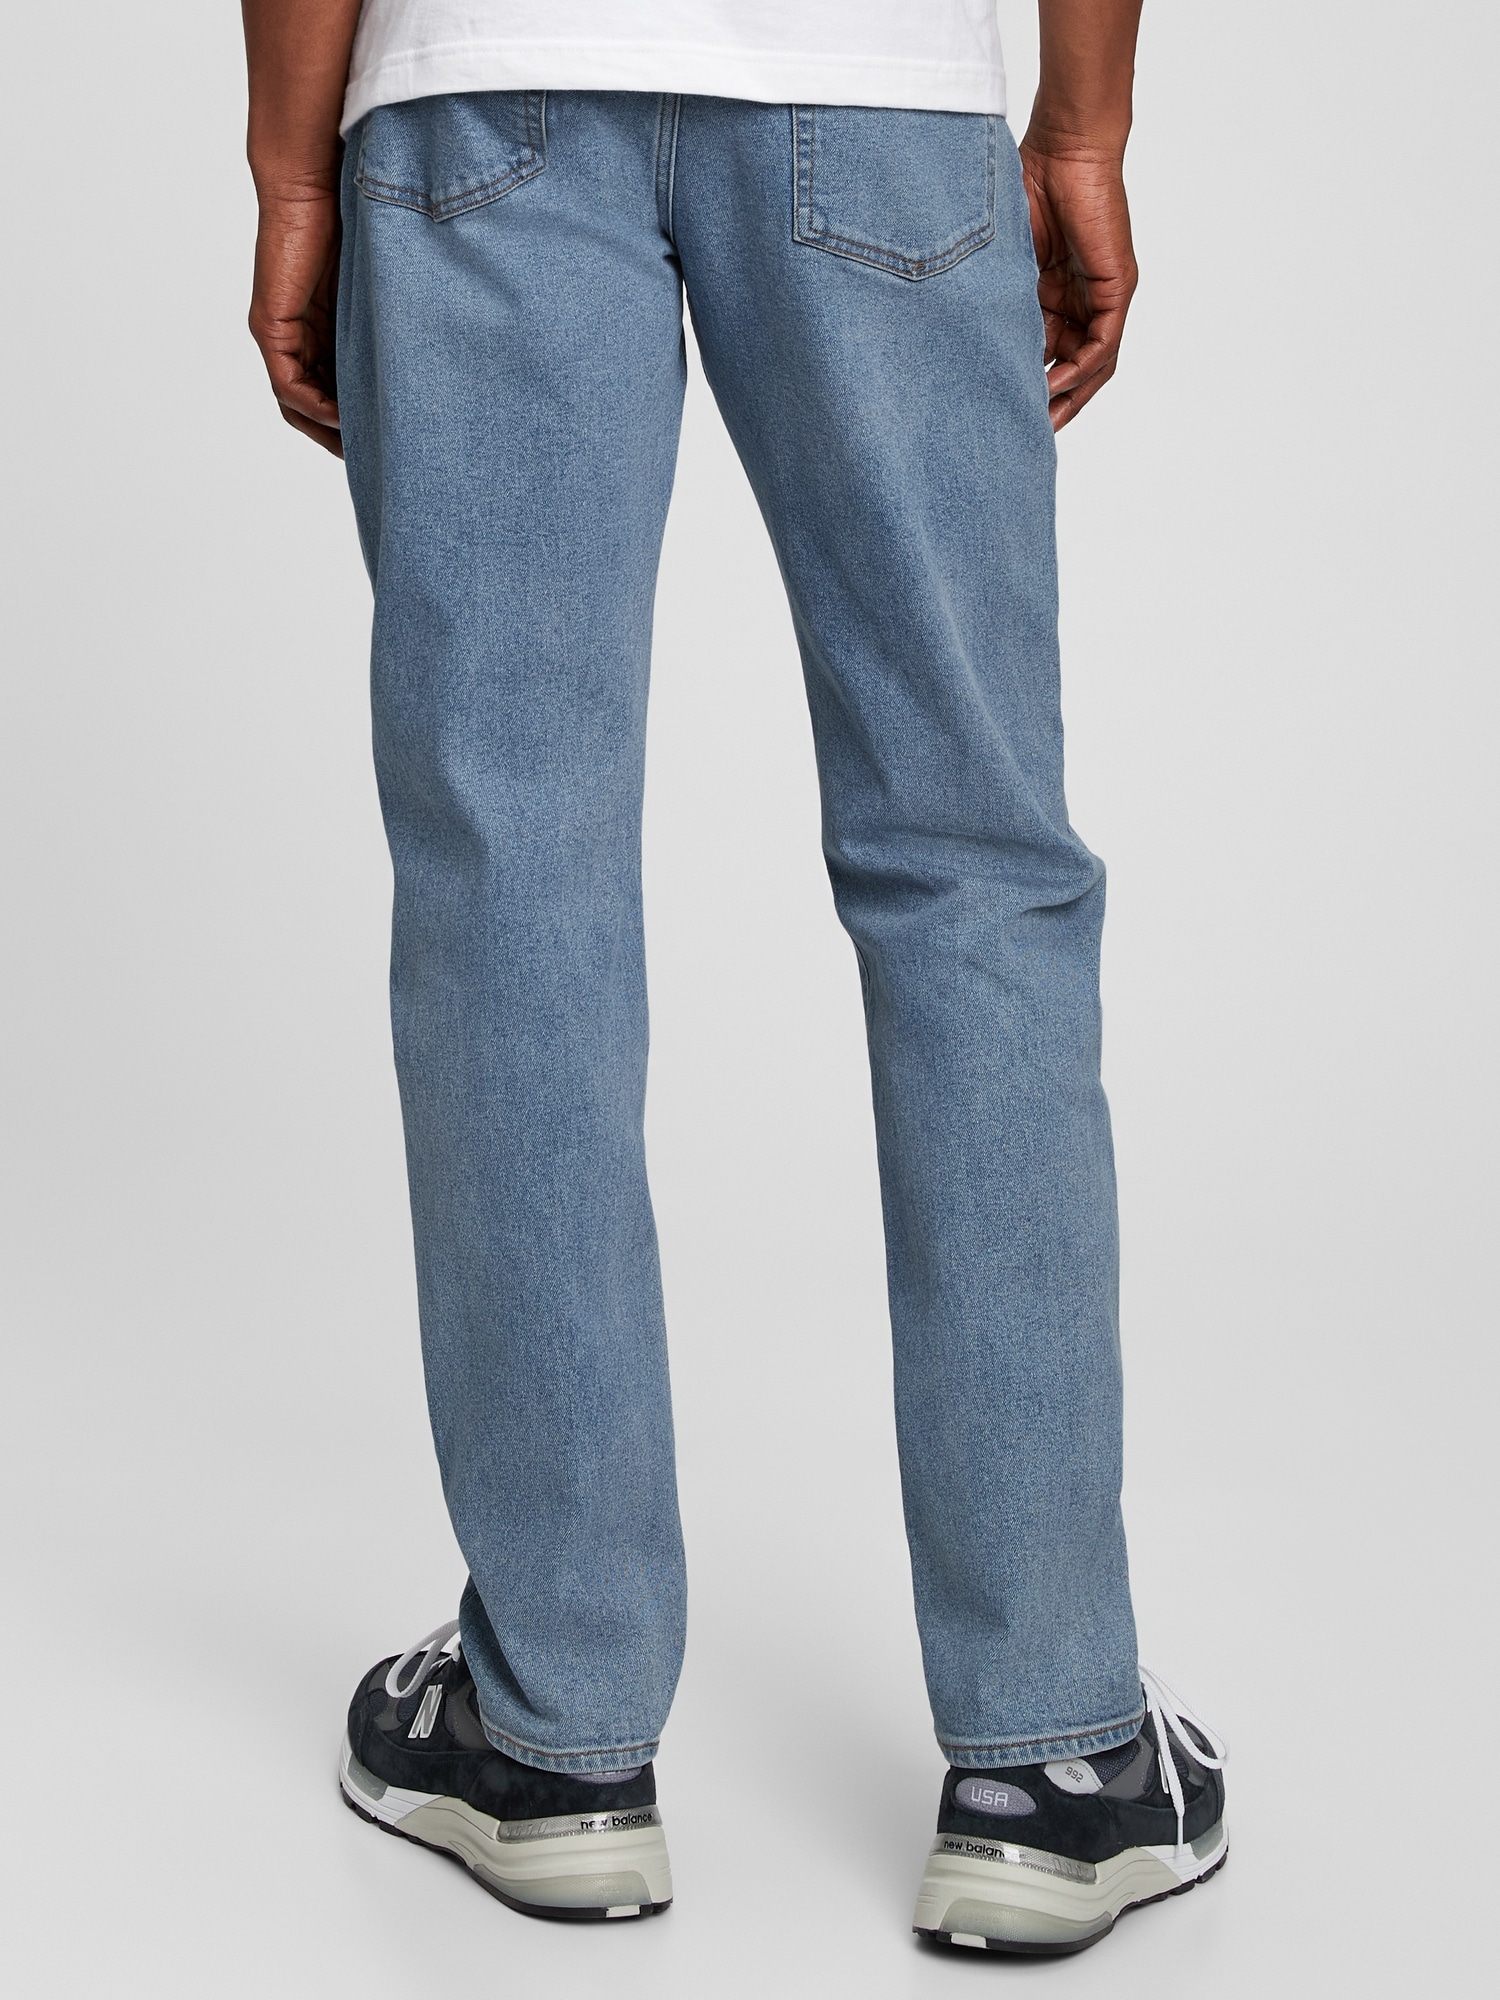 Slim Taper Gapflex Jeans With Washwell by Gap Online, THE ICONIC